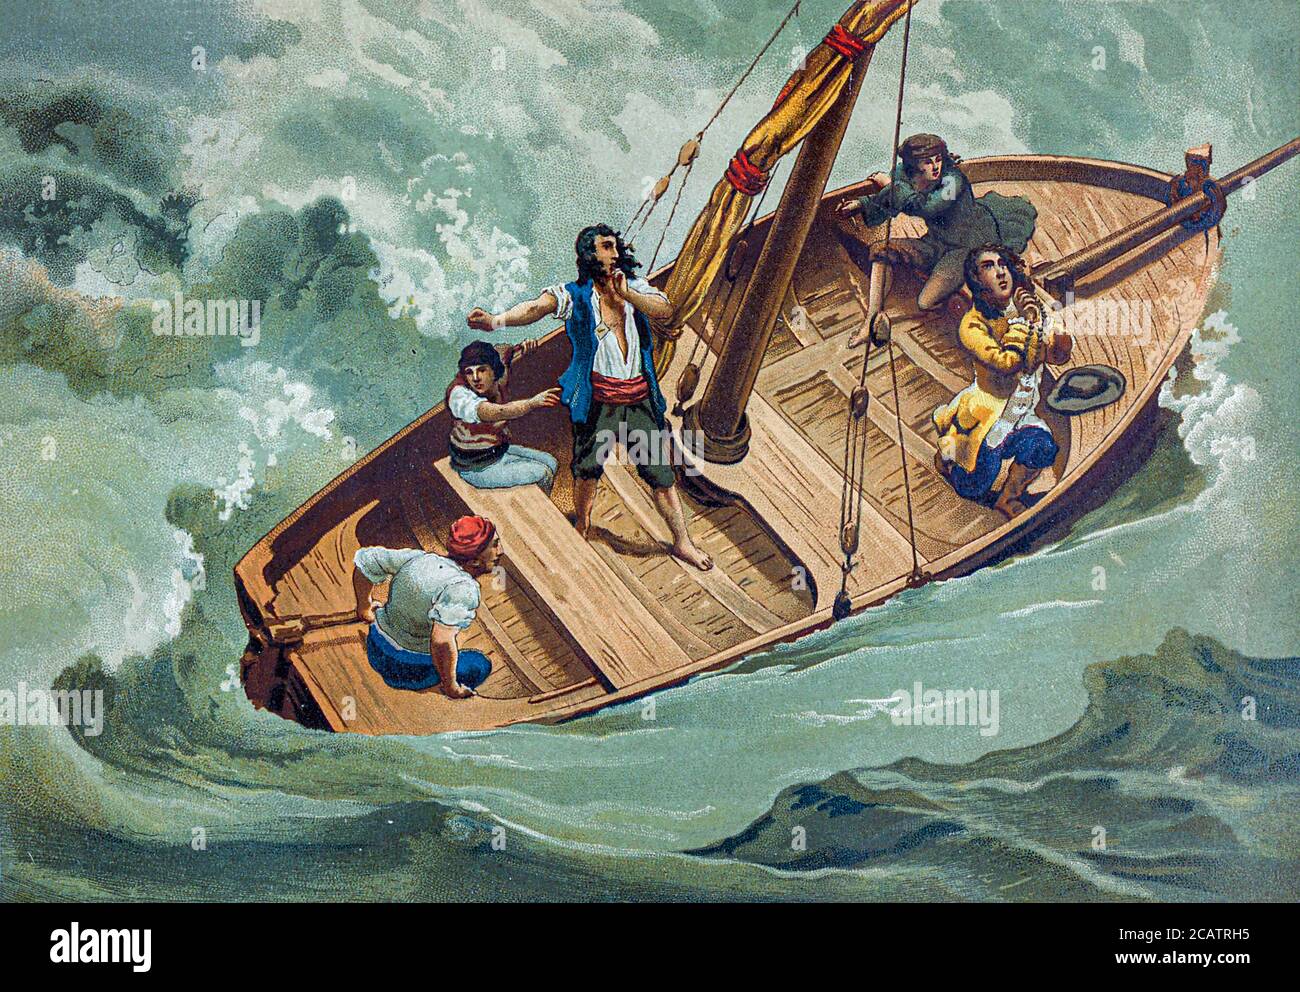 Gottfried Wilhelm (von) Leibniz (Leibnitz) (1 July 1646 – 14 November 1716) was a prominent German polymath and one of the most important logicians, mathematicians and natural philosophers of the Enlightenment. Here praying in a boat during a storm. From the book La ciencia y sus hombres : vidas de los sabios ilustres desde la antigüedad hasta el siglo XIX T. 3  [Science and its men: lives of the illustrious sages from antiquity to the 19th century Vol 3] By by Figuier, Louis, (1819-1894); Casabó y Pagés, Pelegrín, n. 1831 Published in Barcelona by D. Jaime Seix, editor , 1879 (Imprenta de Bas Stock Photo